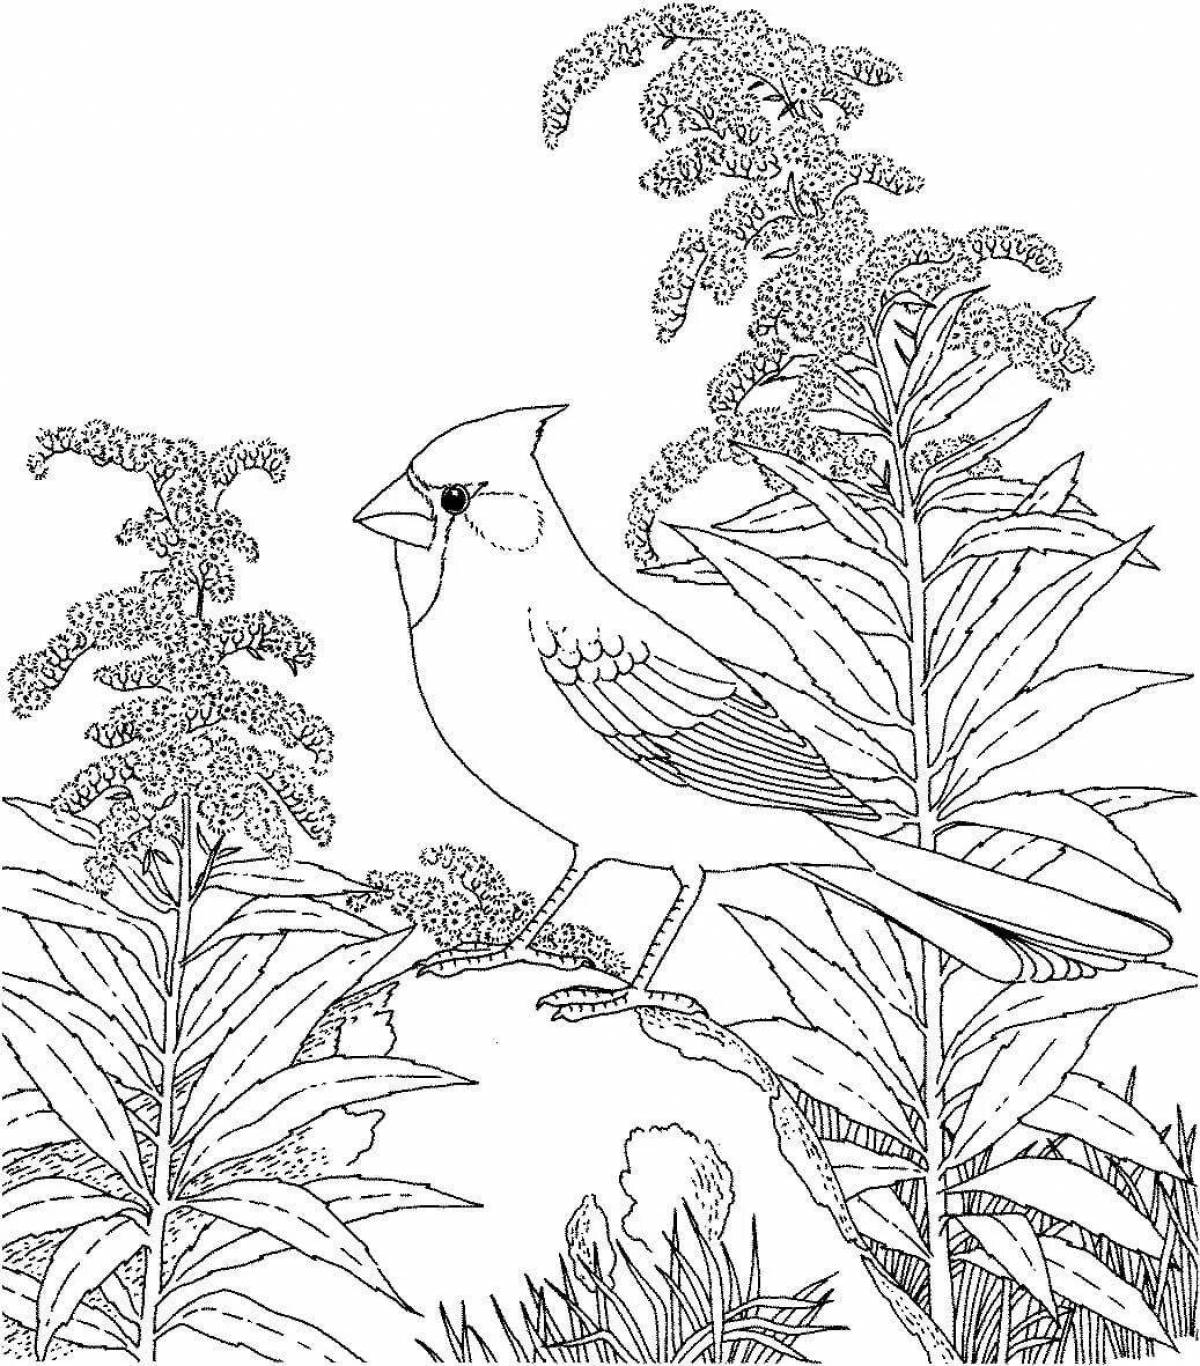 Adorable animal and bird coloring pages